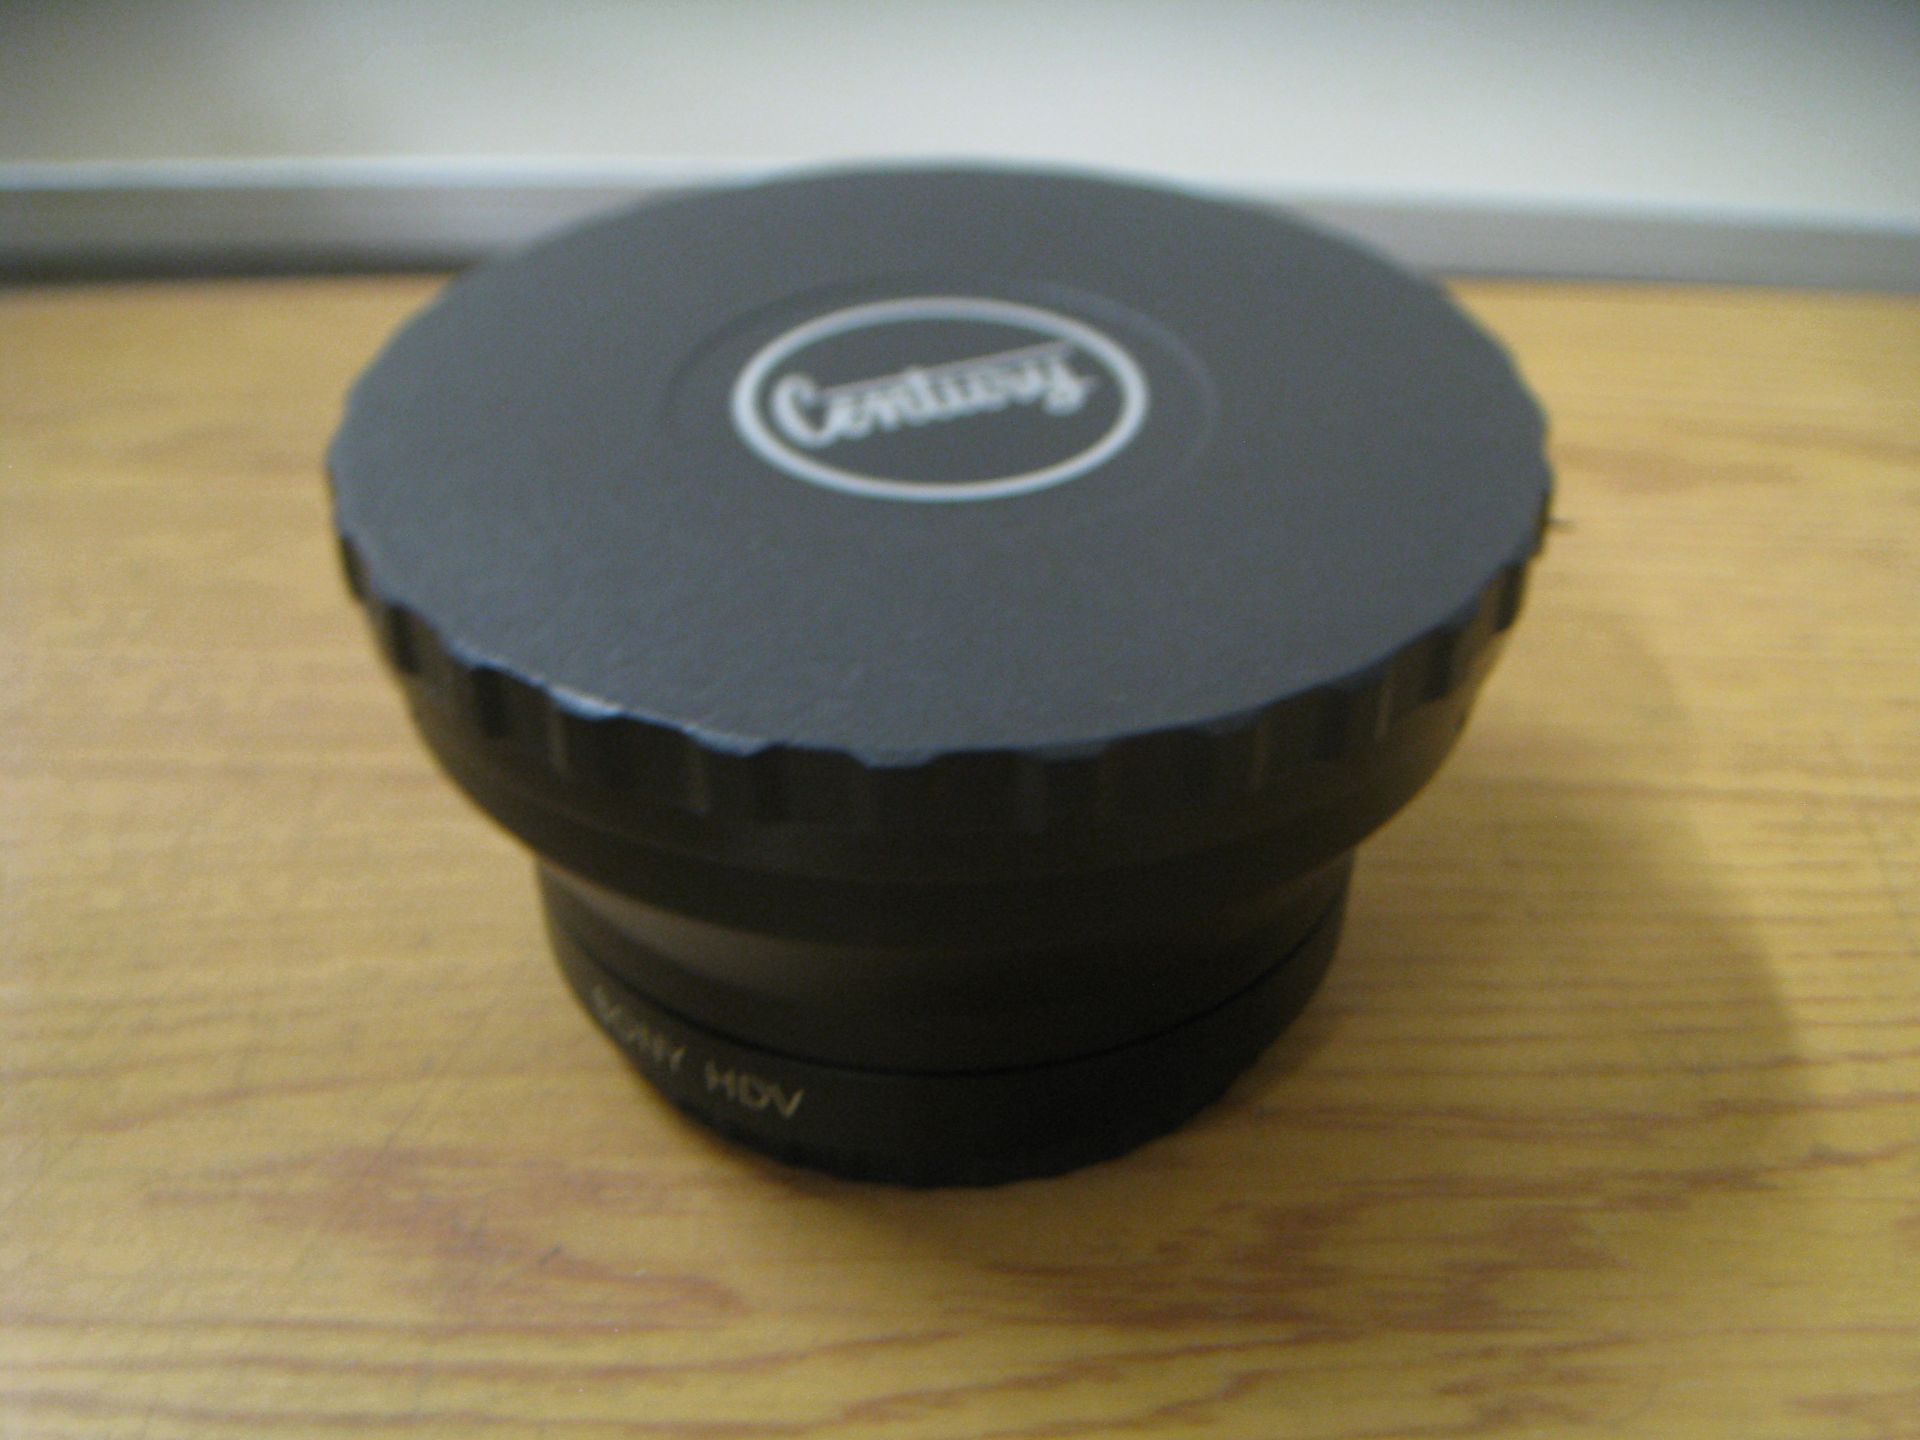 SONY HDV PRO SERIES HD 0.7x WIDE ANGLE CONVERTER C110852.(METAL LIP AT FRONT OF LENS BENT - SEE - Image 5 of 5